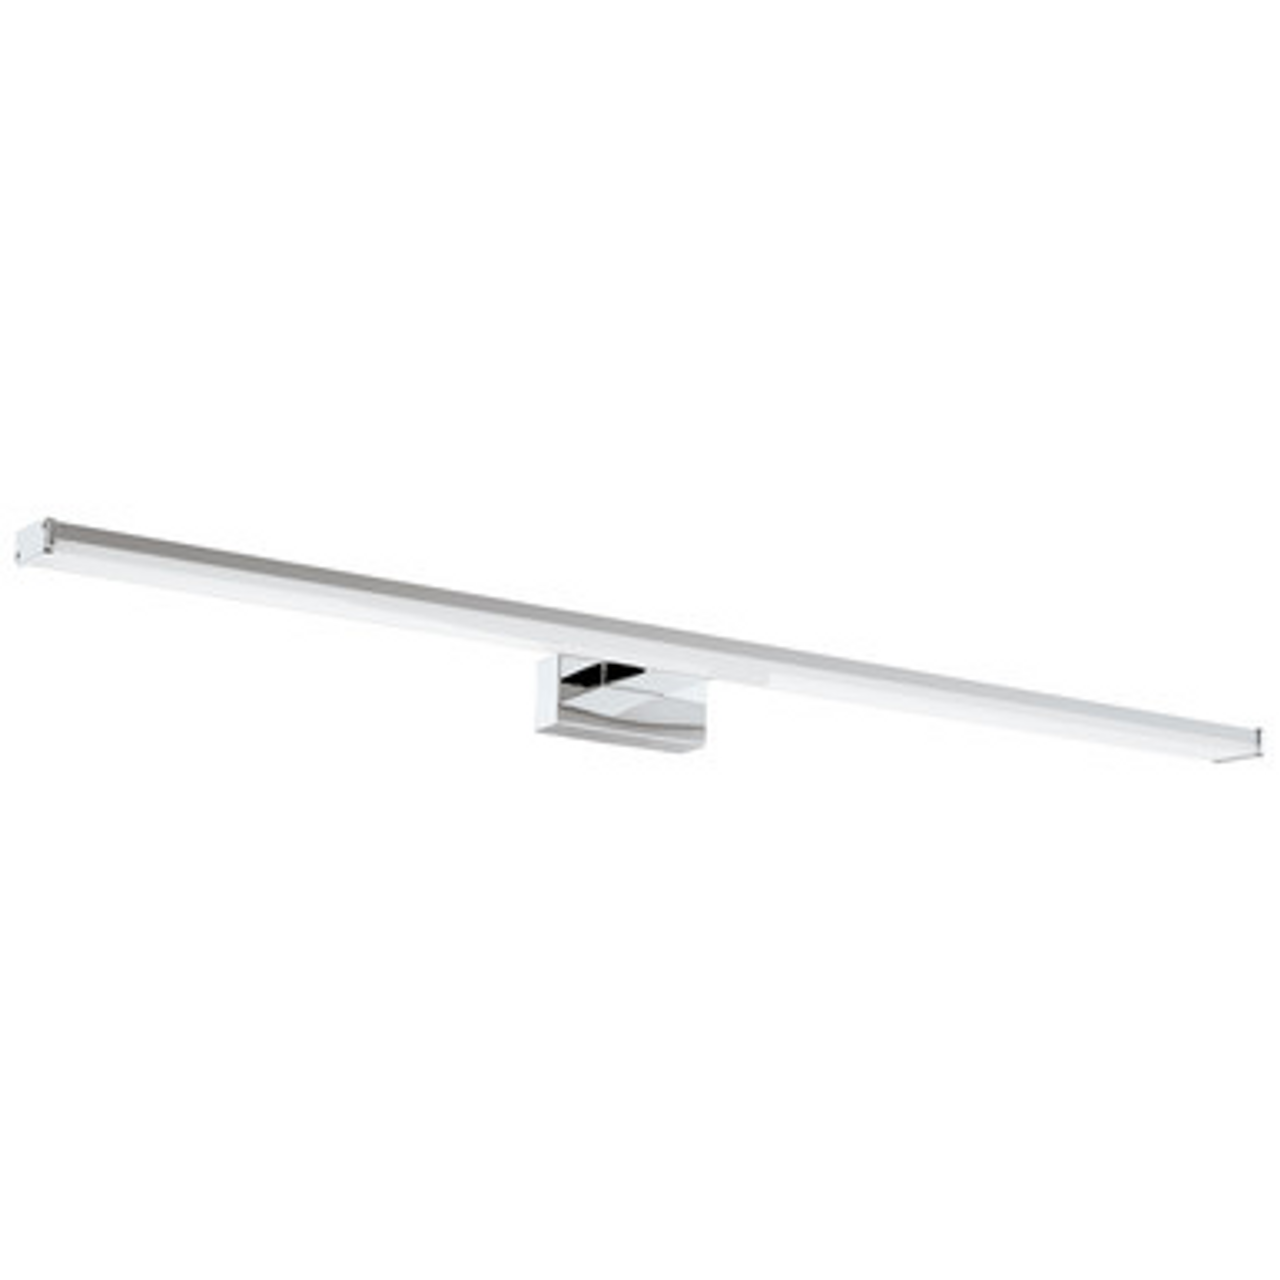 Chrome 780mm vanity wall light with opal diffuser